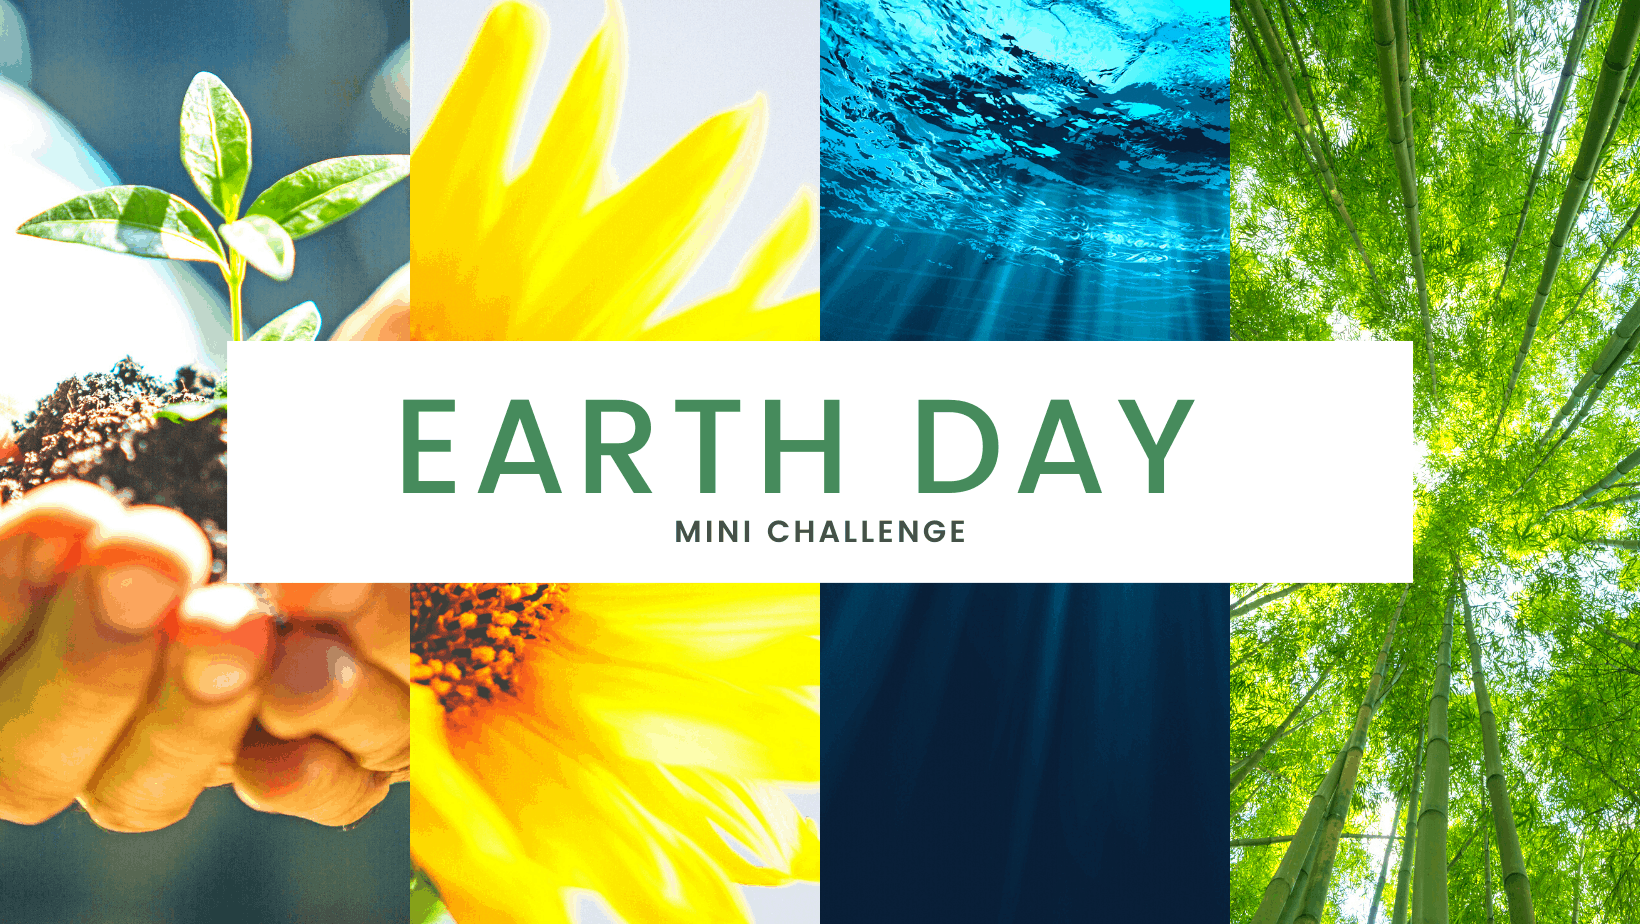 EARTH DAY CHALLENGE